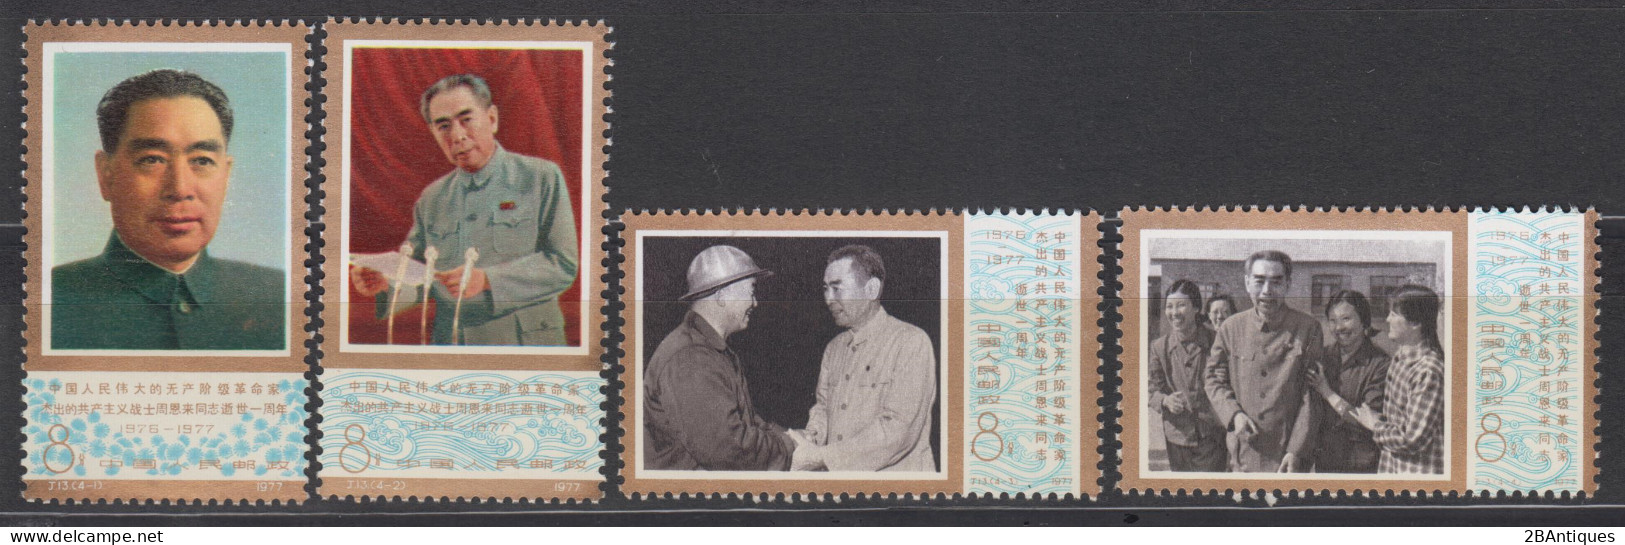 PR CHINA 1977 - The 1st Anniversary Of The Death Of Chou En-lai MNH** OG XF - Neufs